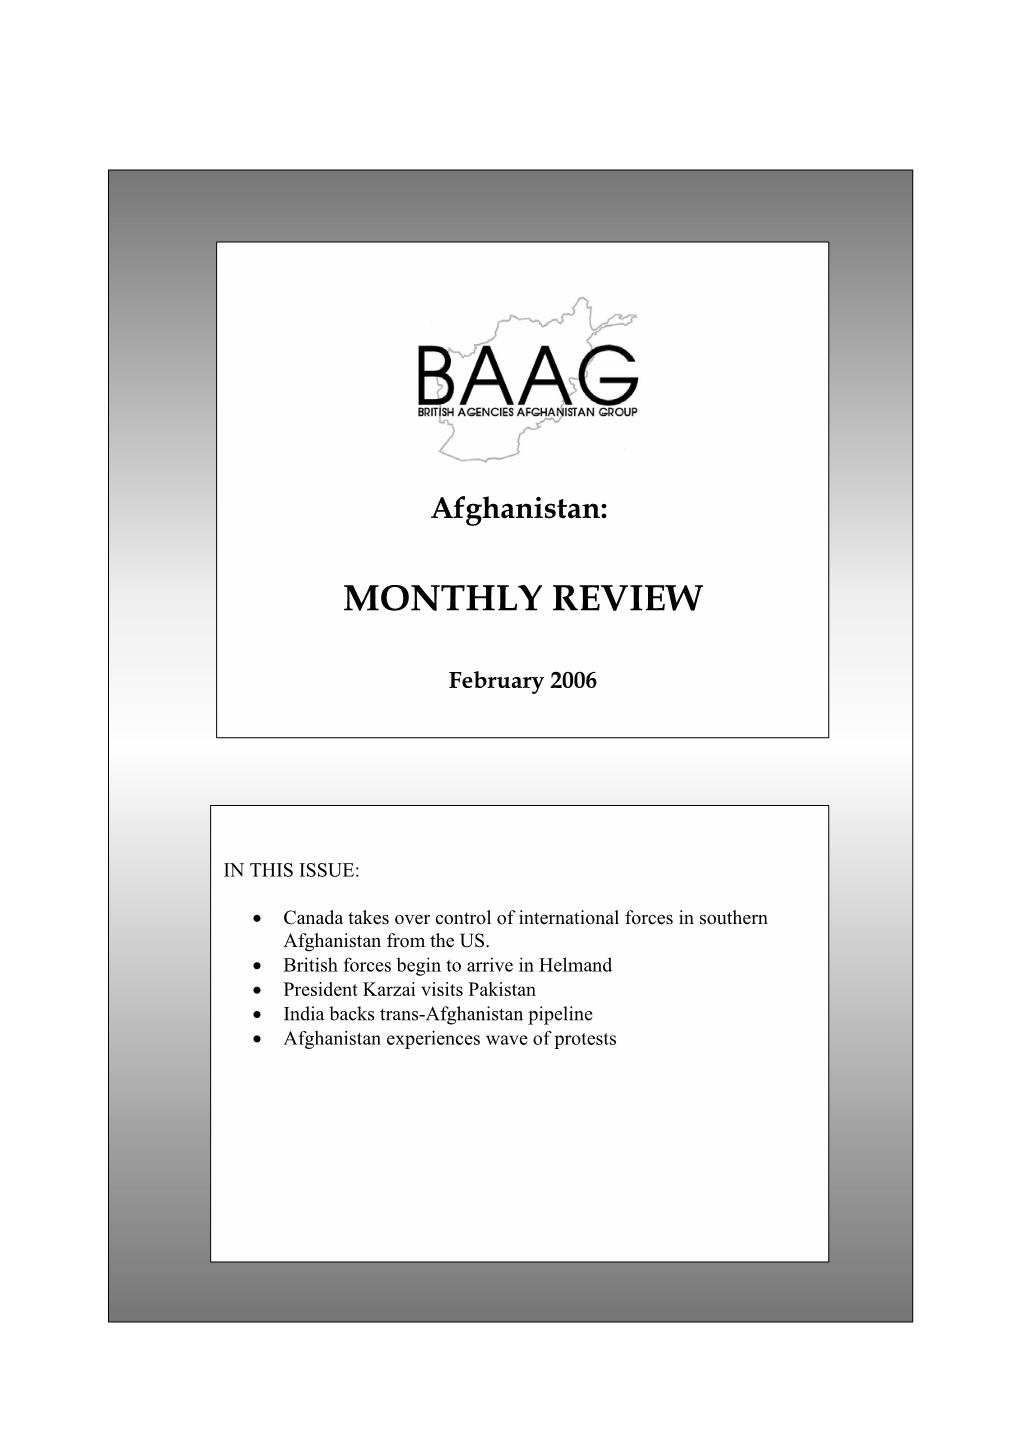 Afghanistan: MONTHLY REVIEW